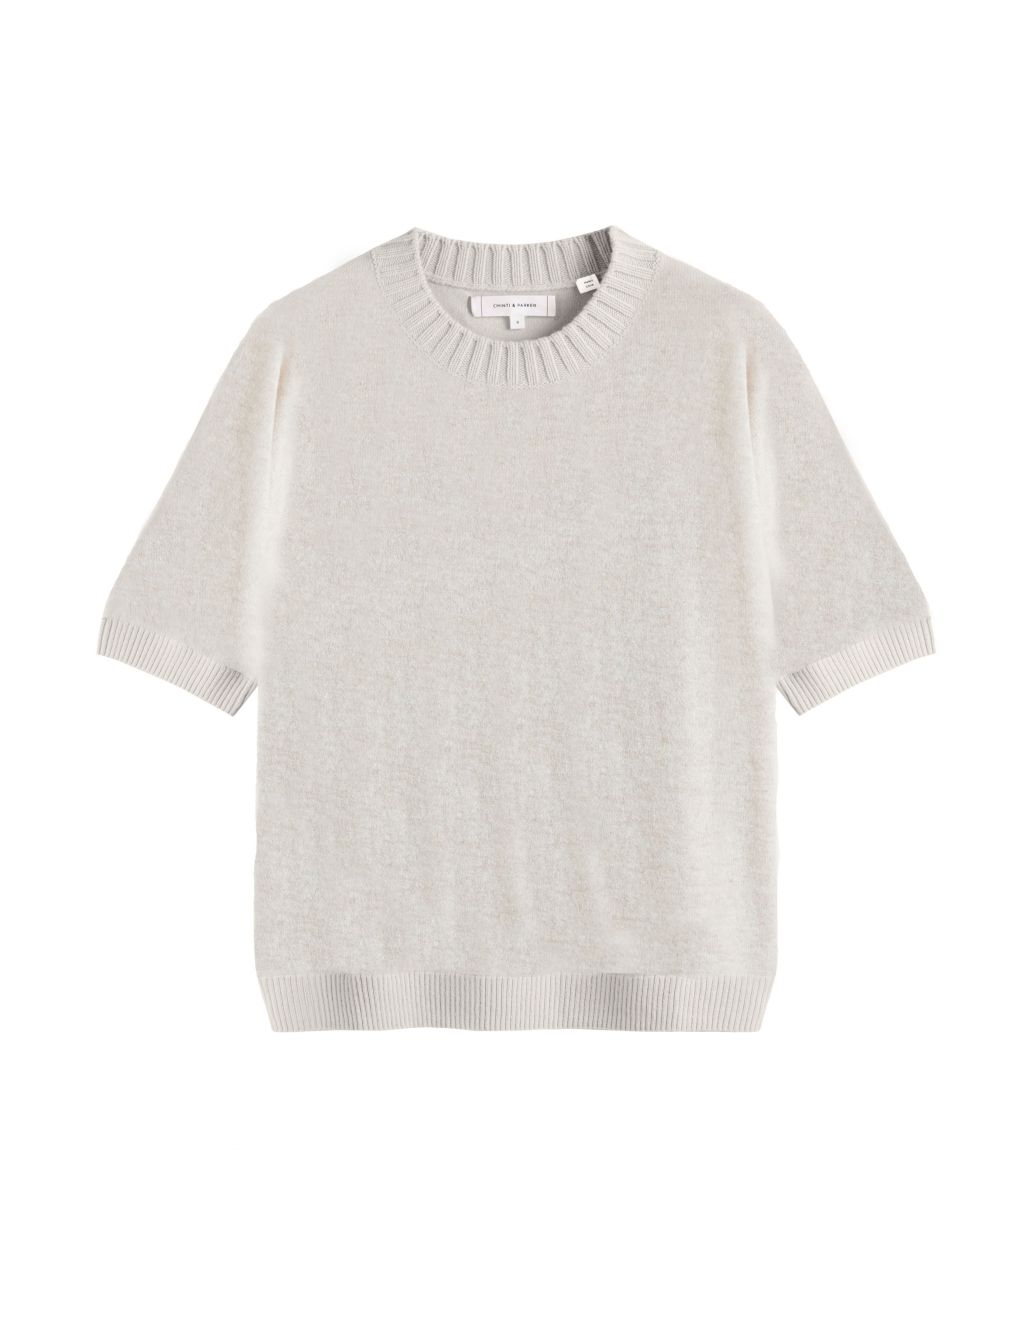 Wool Rich Knitted Top with Cashmere image 2